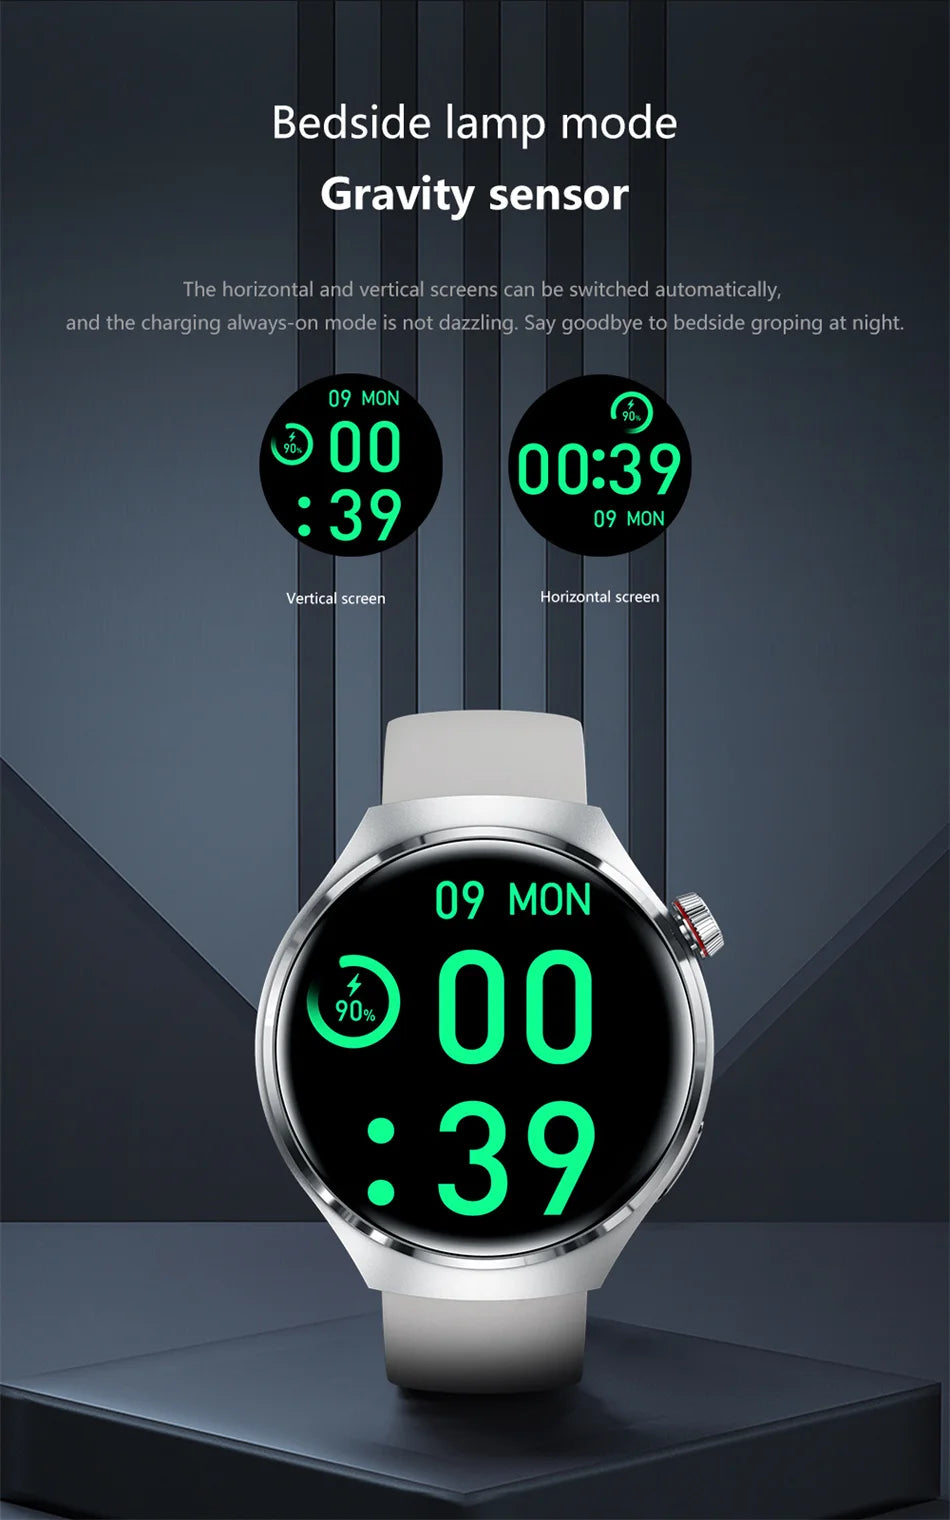 GT4 Pro SmartWatch with GPS and Health Monitoring